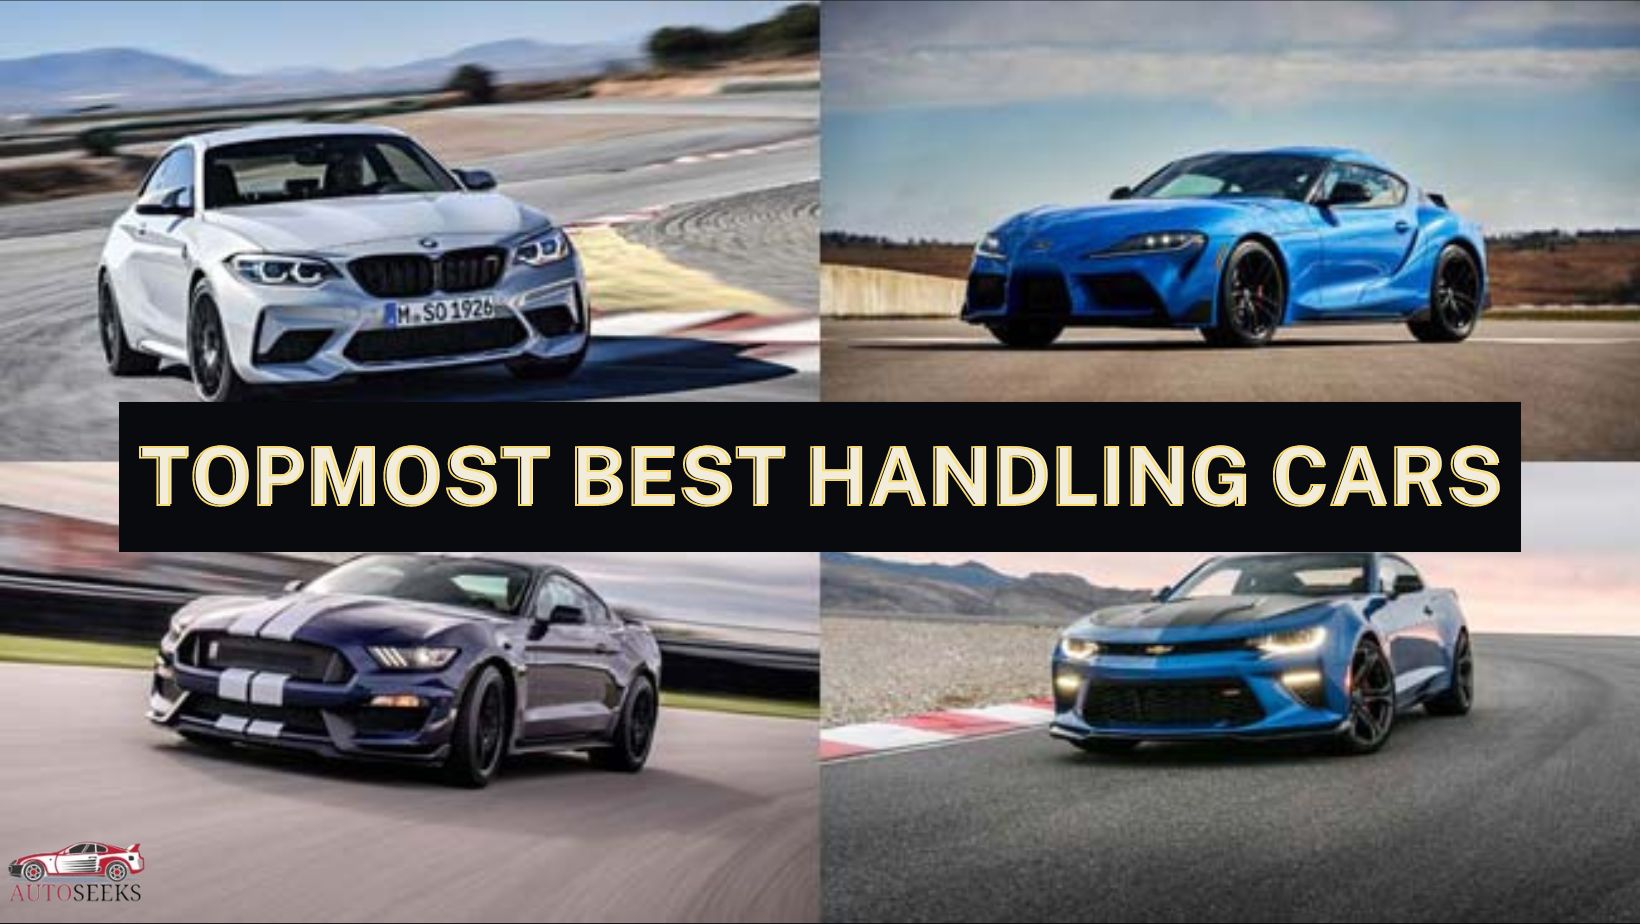 The Top 9 Best Handling Cars That Will Take Your Driving Experience to